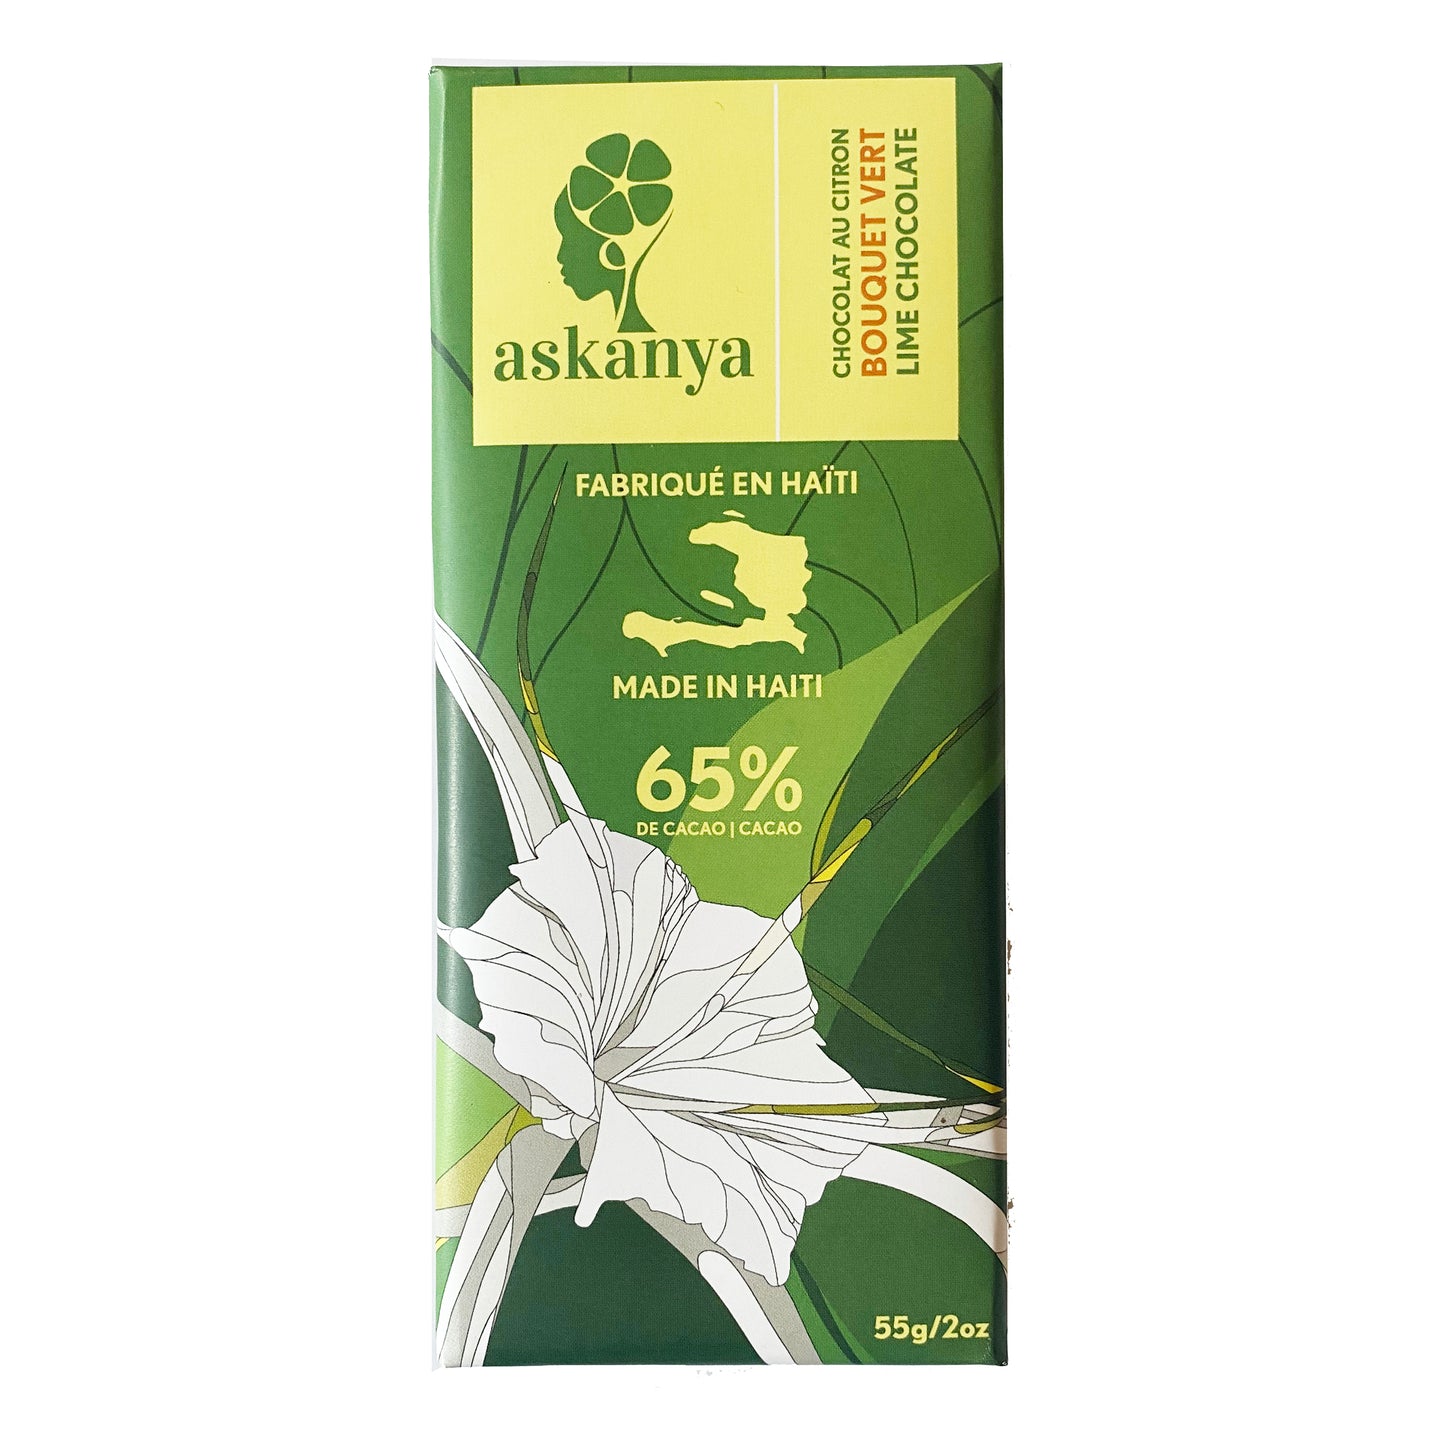 Green packaging with white lily (Haitian flower). Sticker with company logo (Askanya) and chocolate flavor information - Lime Chocolate  called "Bouquet Vert". Packaging also shows Haiti country map and cacao percentage of chocolate bar: 65%. Chocolate bar is 55g or 2oz.